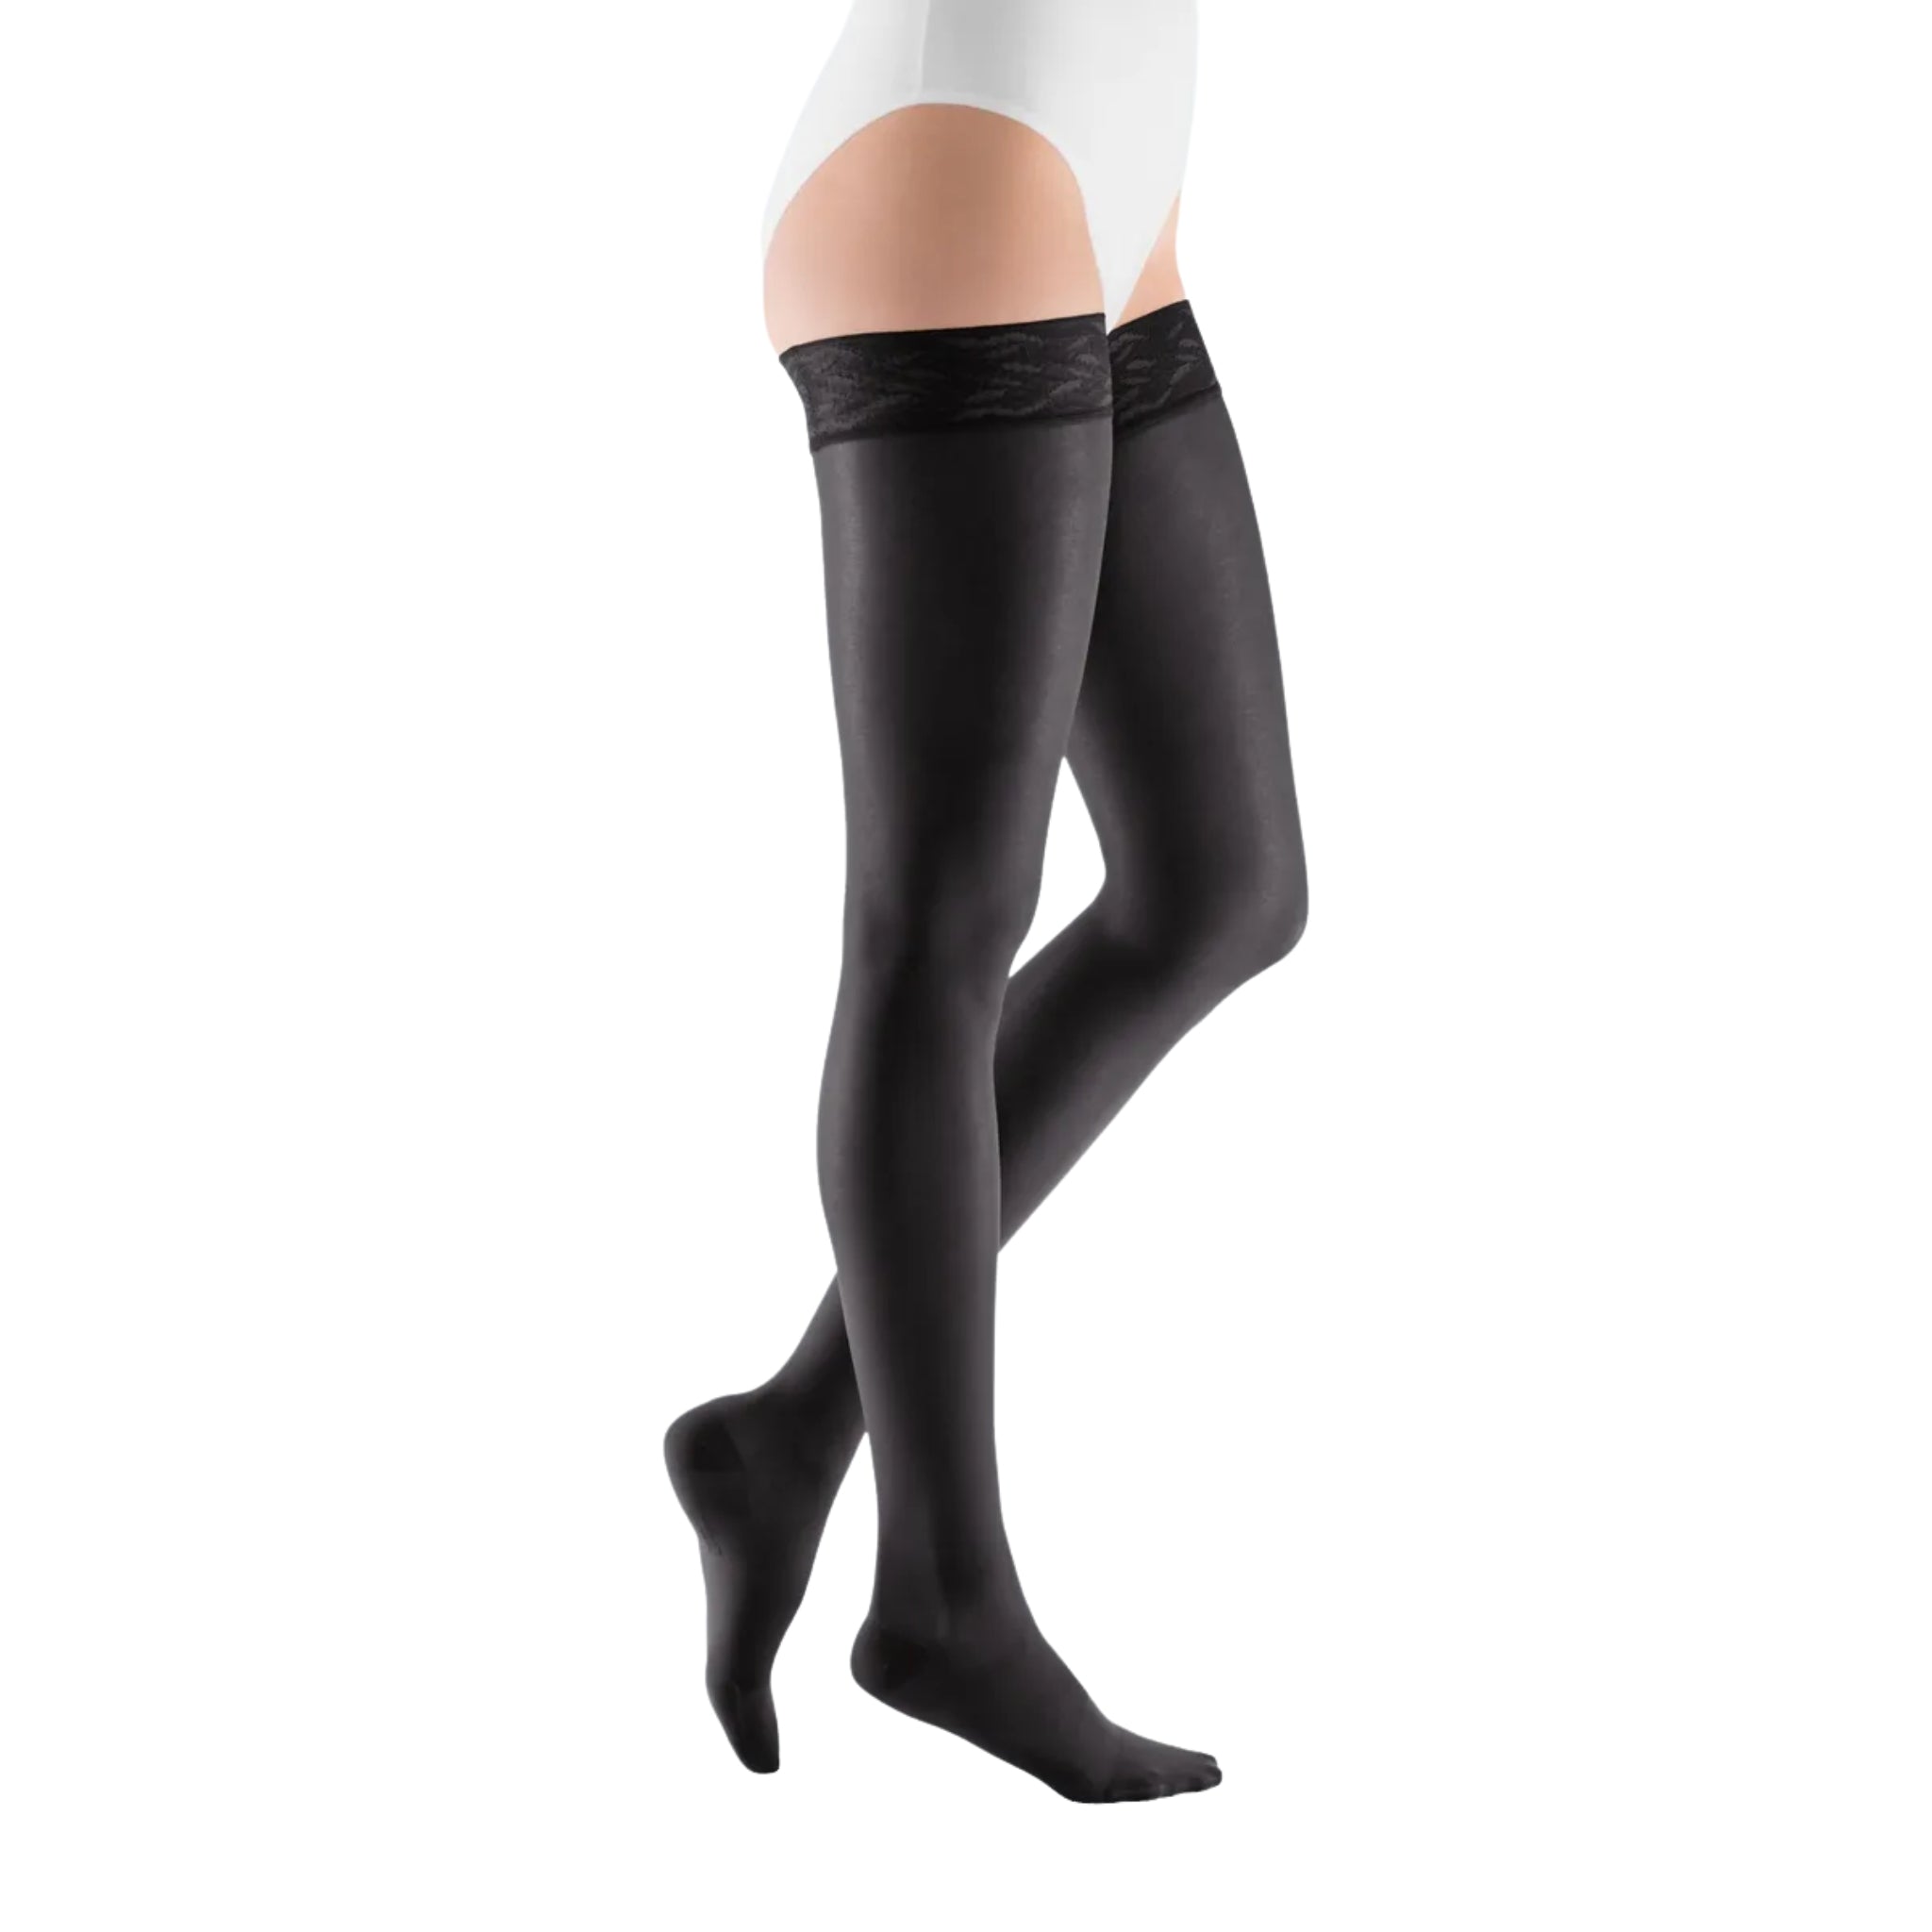 Compression Stockings | Thigh High | Closed Toe I Attractive Topband I Black I Sheer & Soft